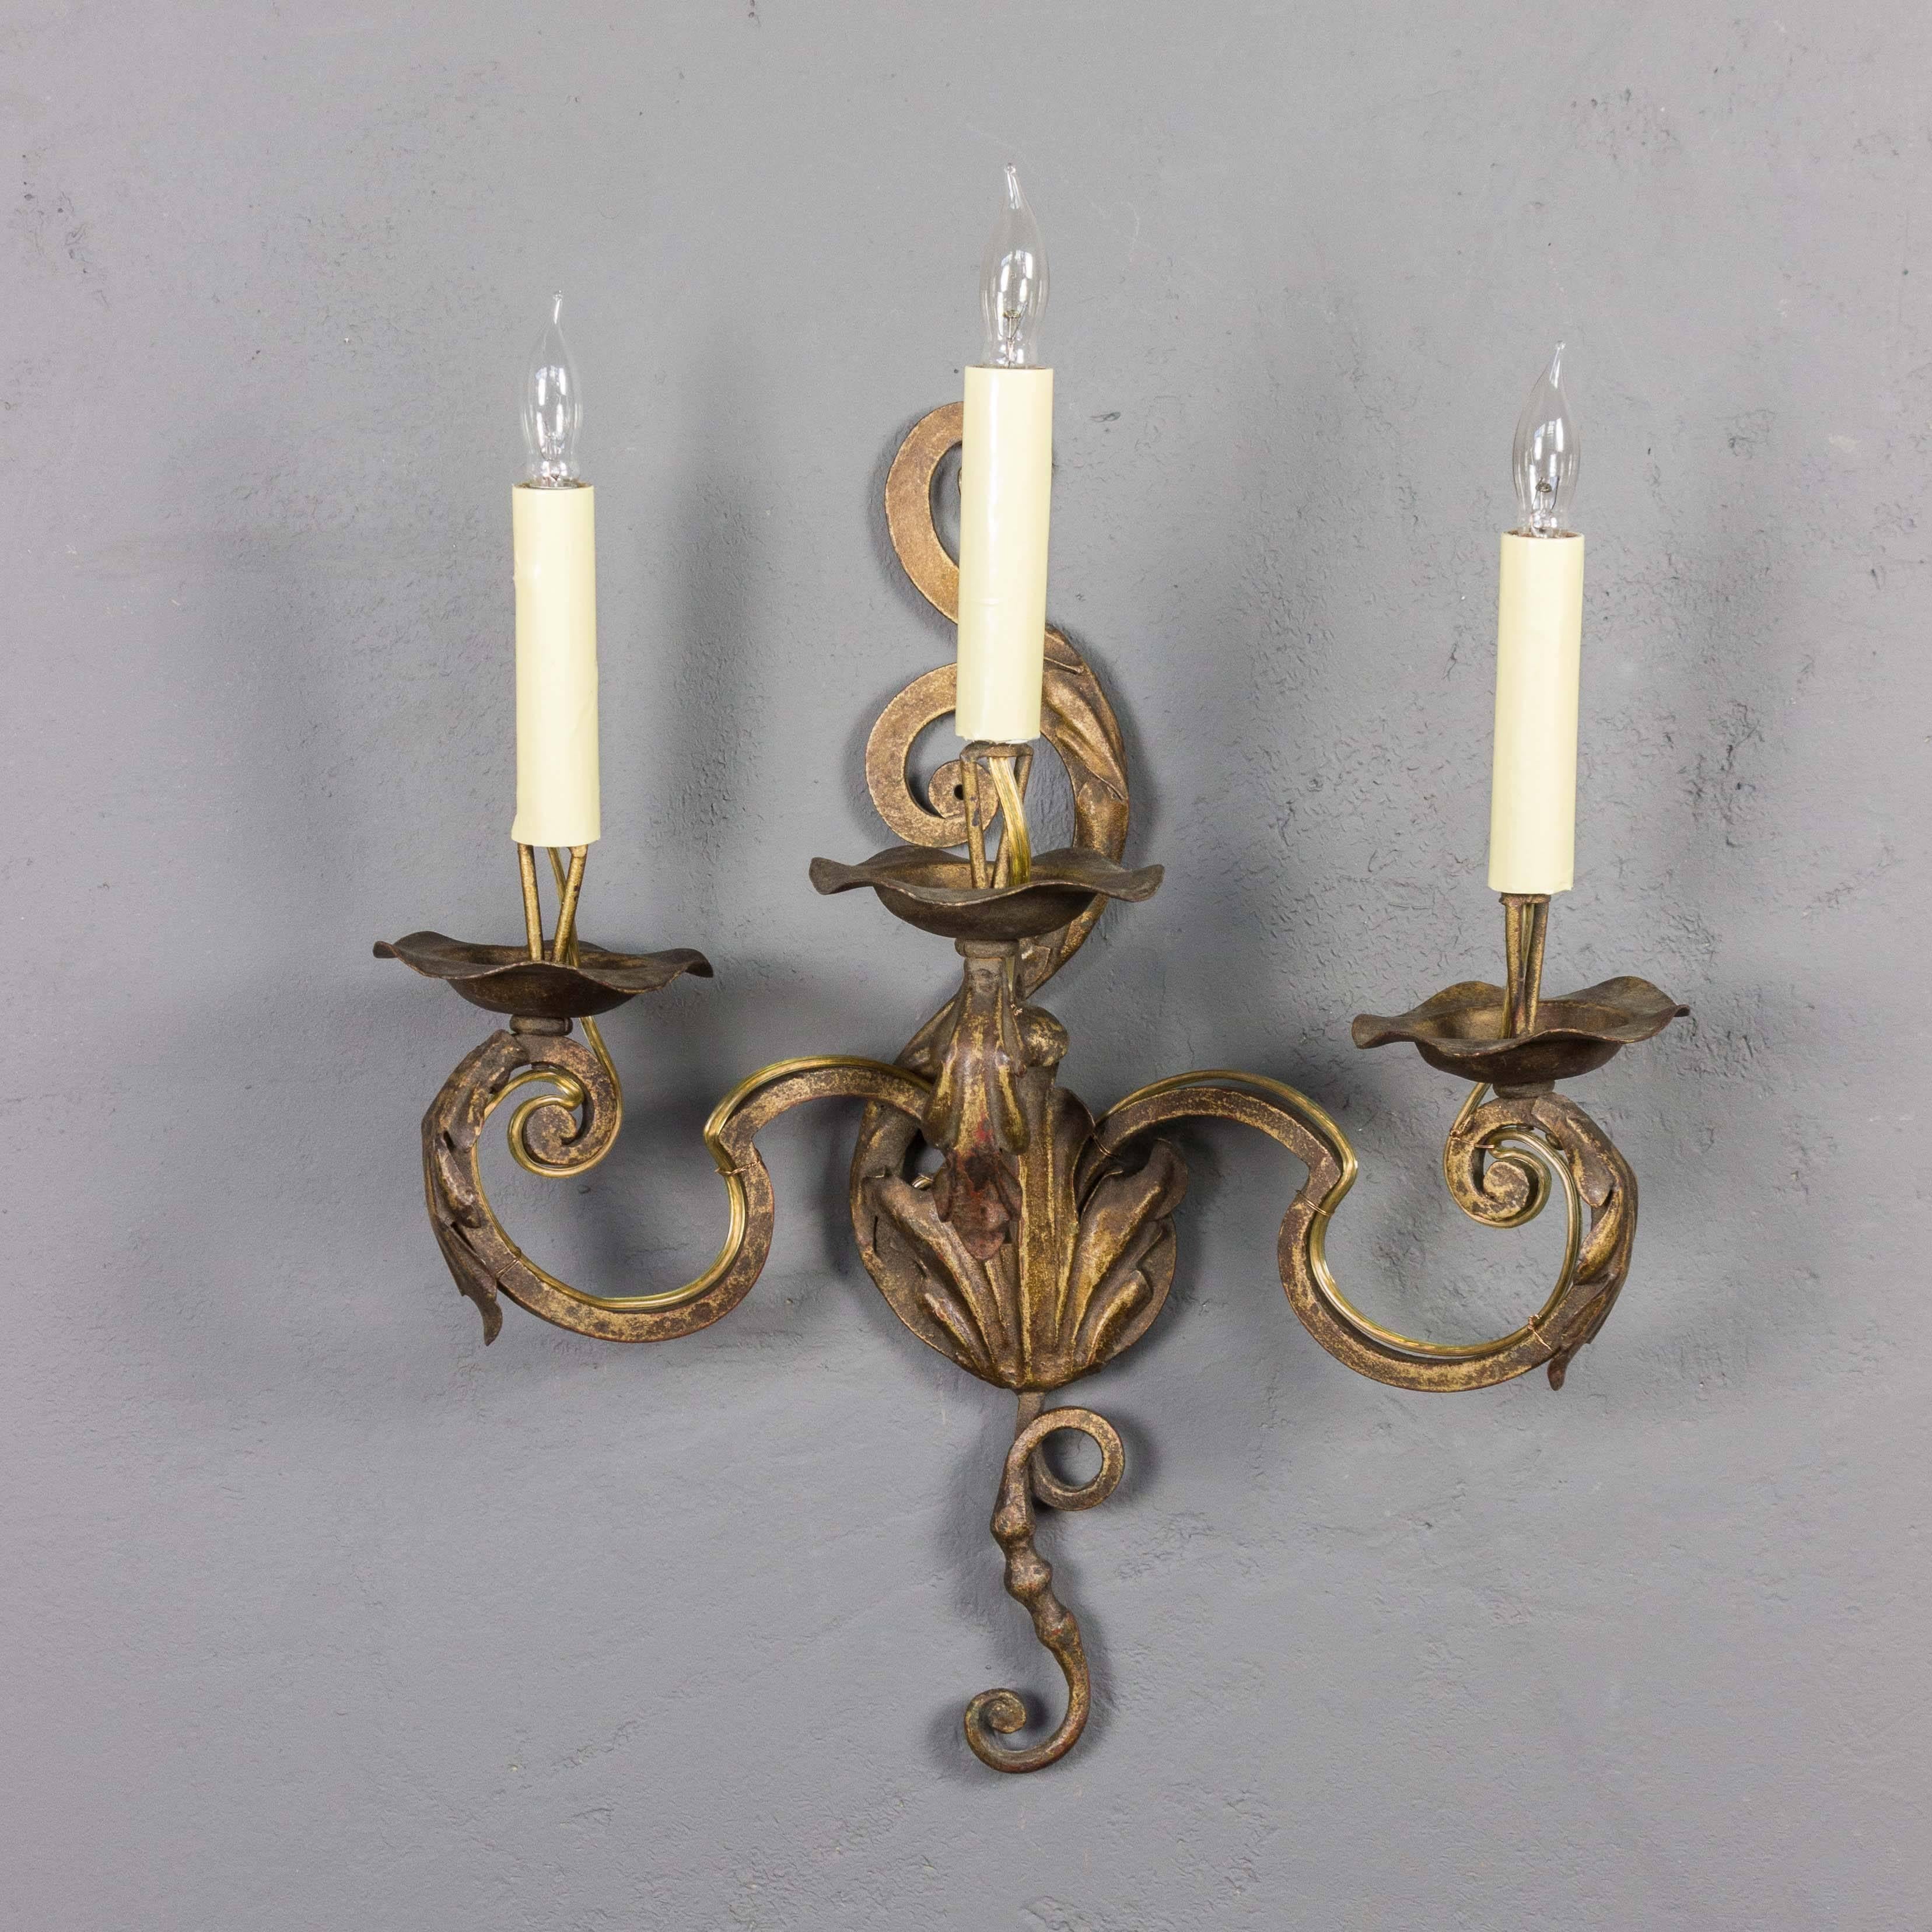 Pair of gilt metal, three armed sconces, wrought iron with applied leaf decorations, French, 1920s. Rewired (not UL listed). Measures: 16